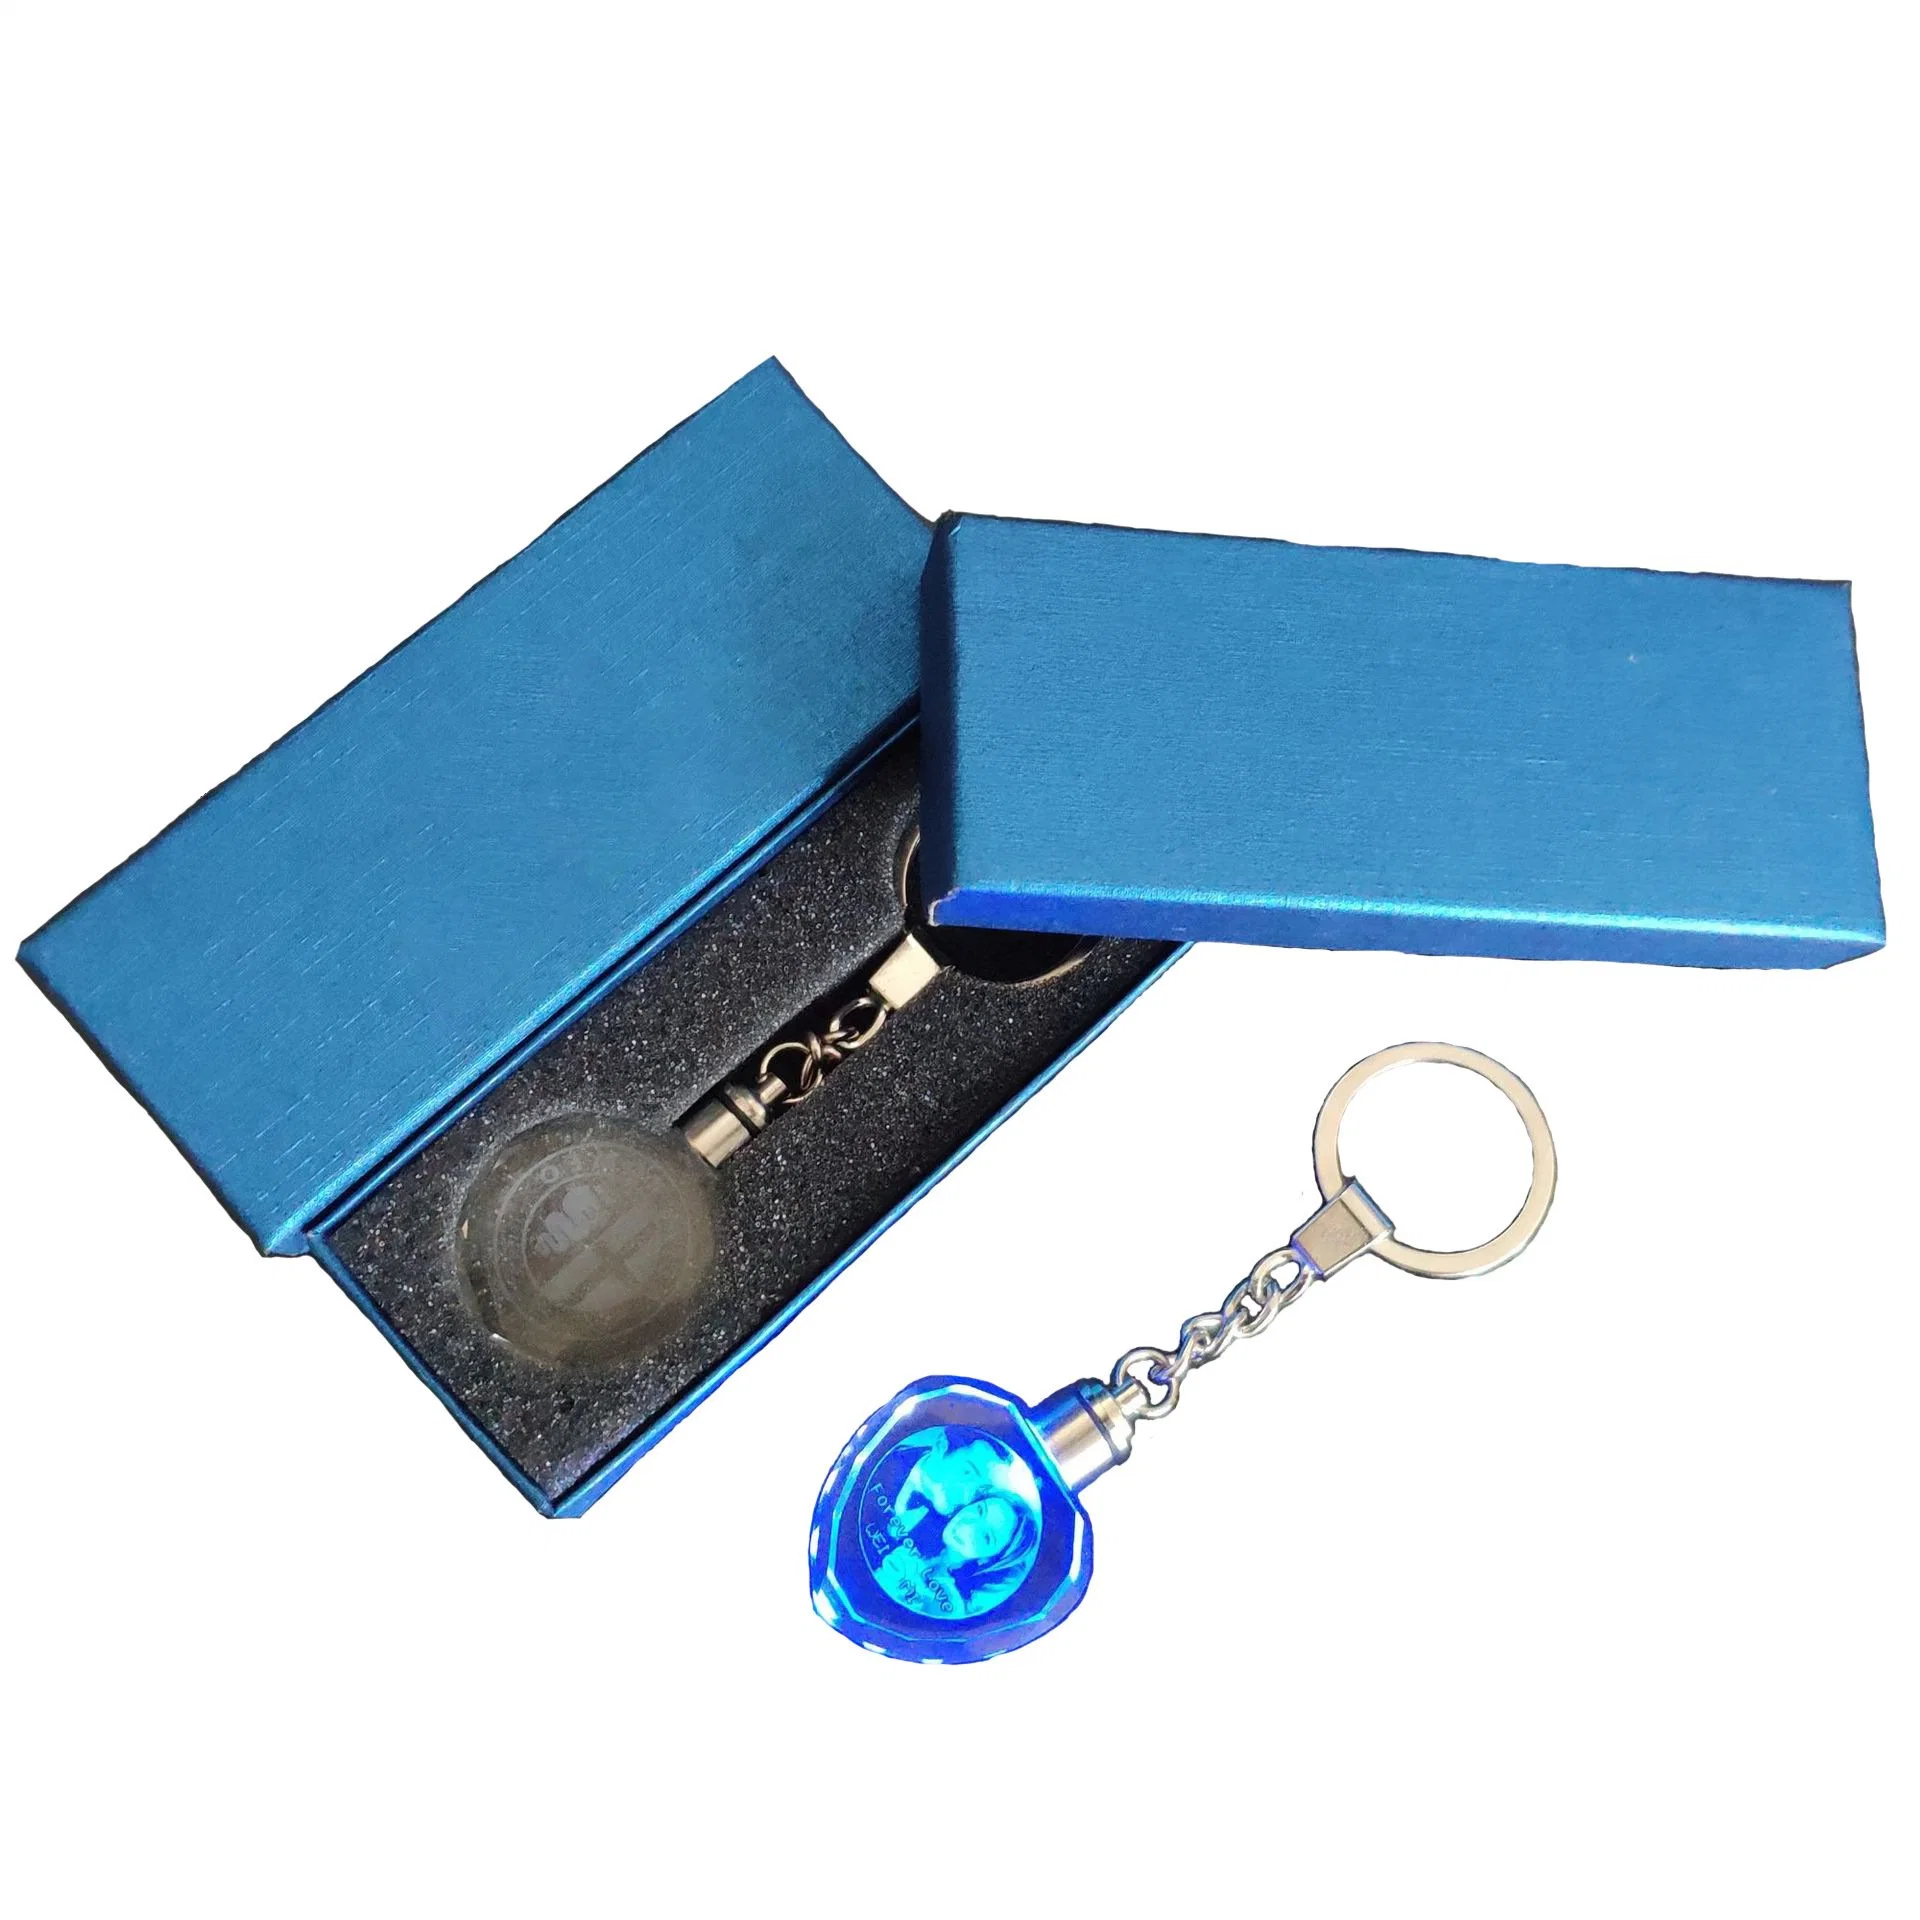 Wholesale New Arrival Promotional Gift LED Light 3D Crystal Keychains